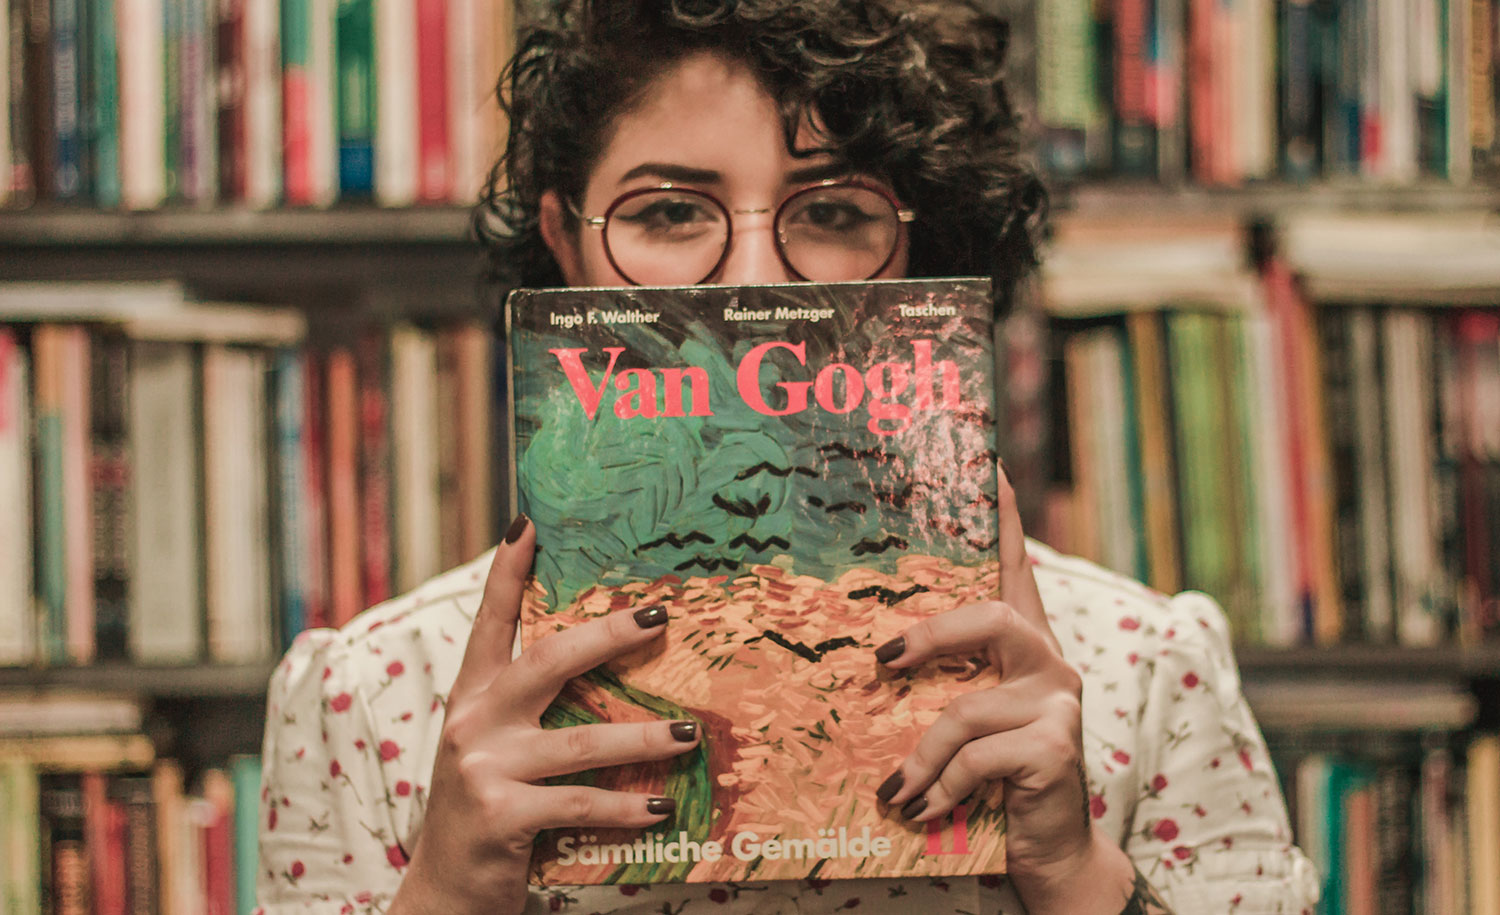 A highly sensitive person holds a book about Vincent van Gogh